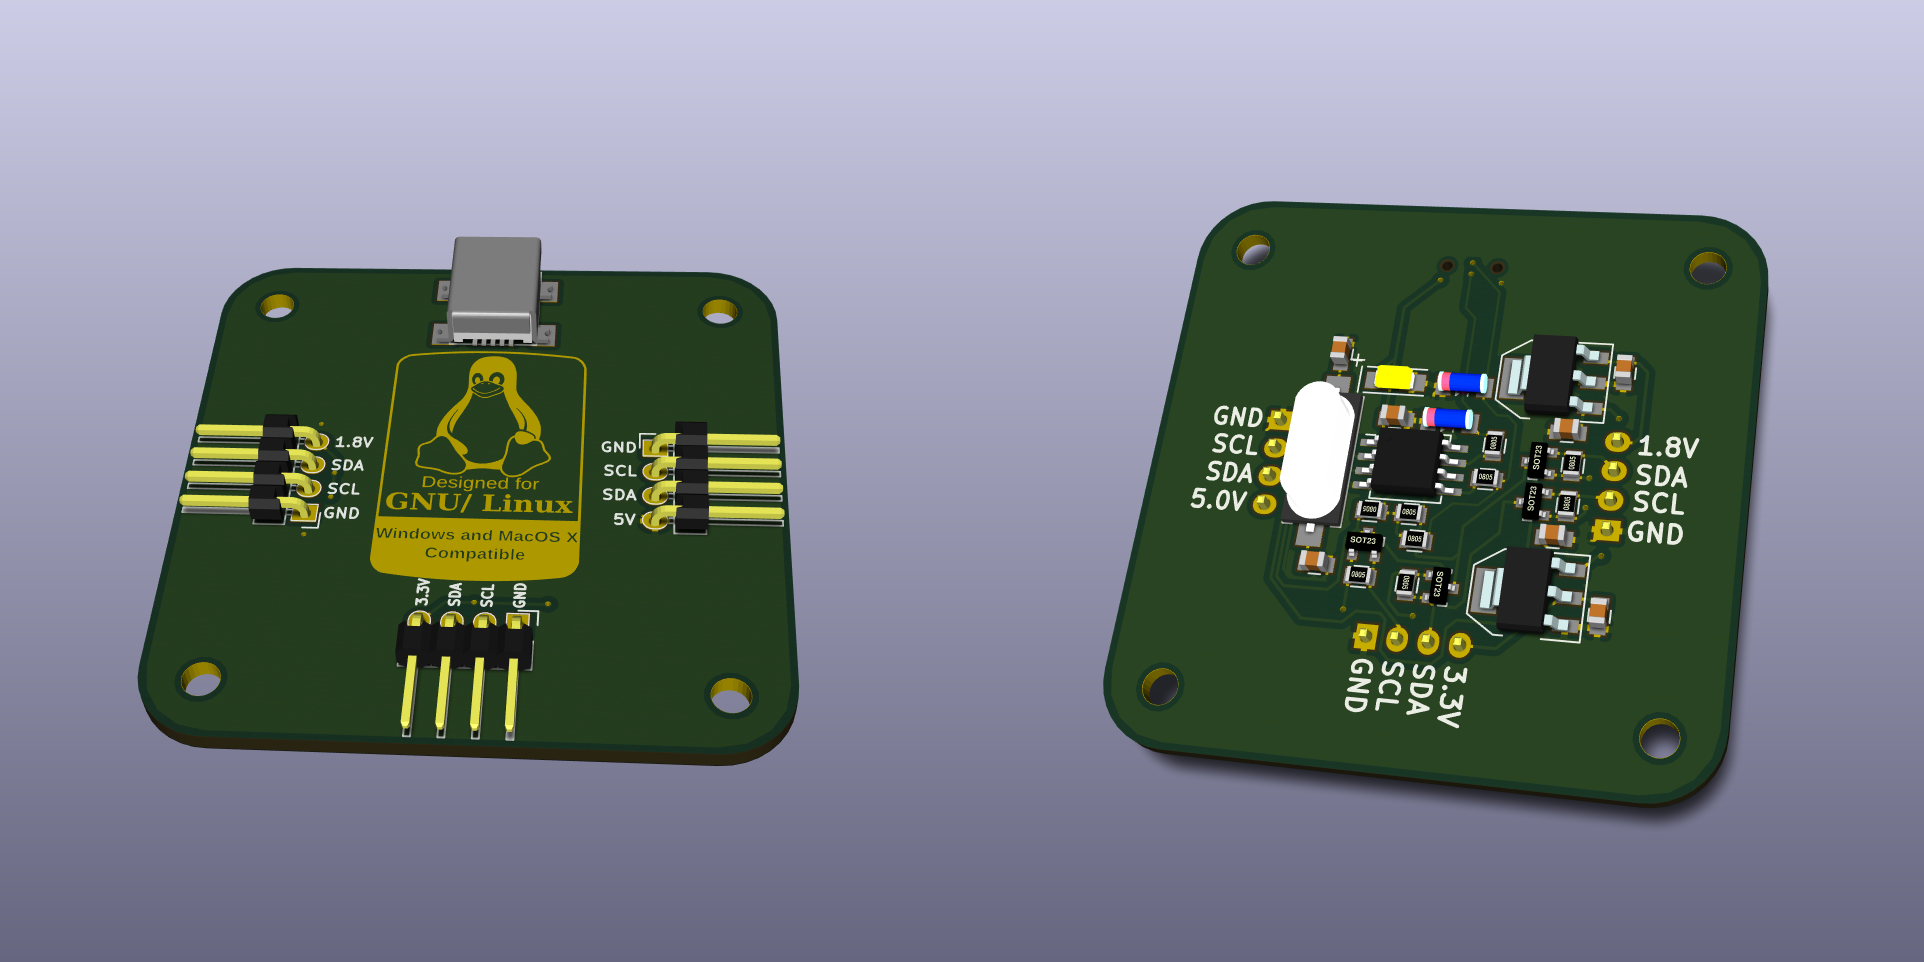 Rendered image of the PCB